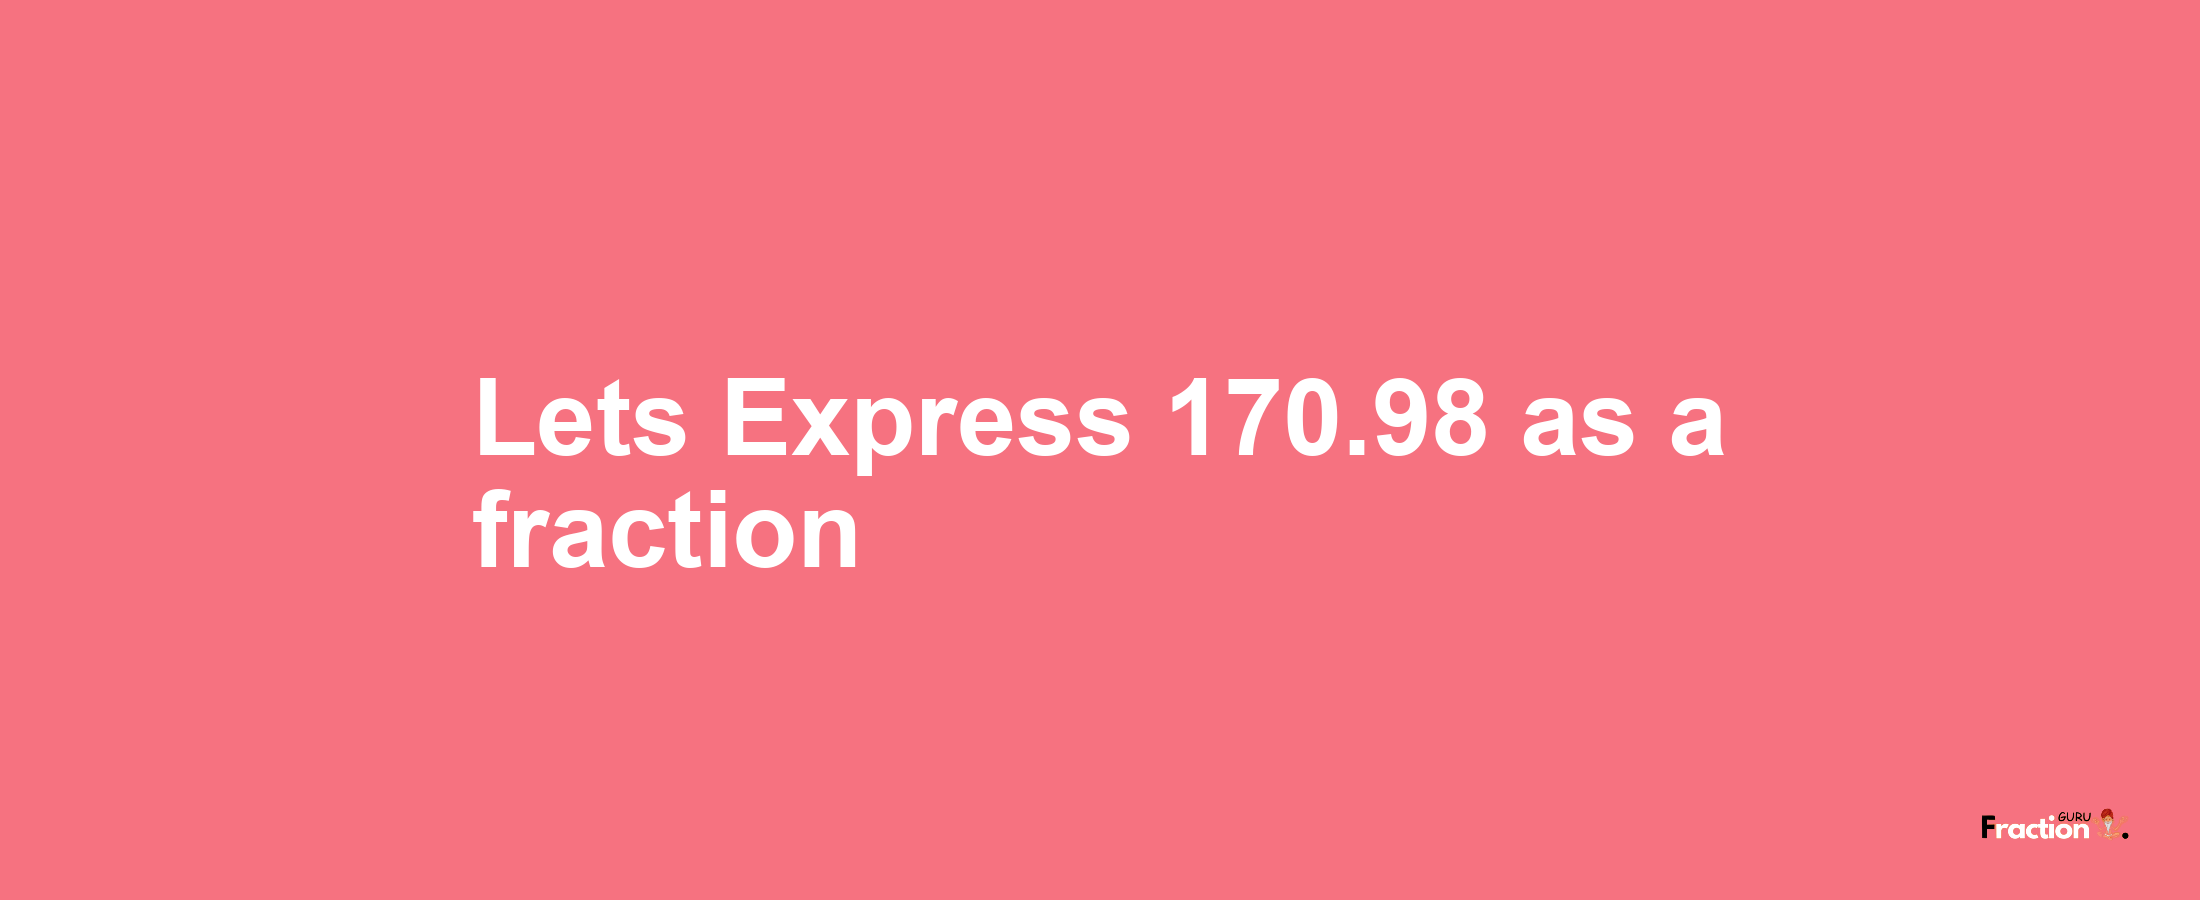 Lets Express 170.98 as afraction